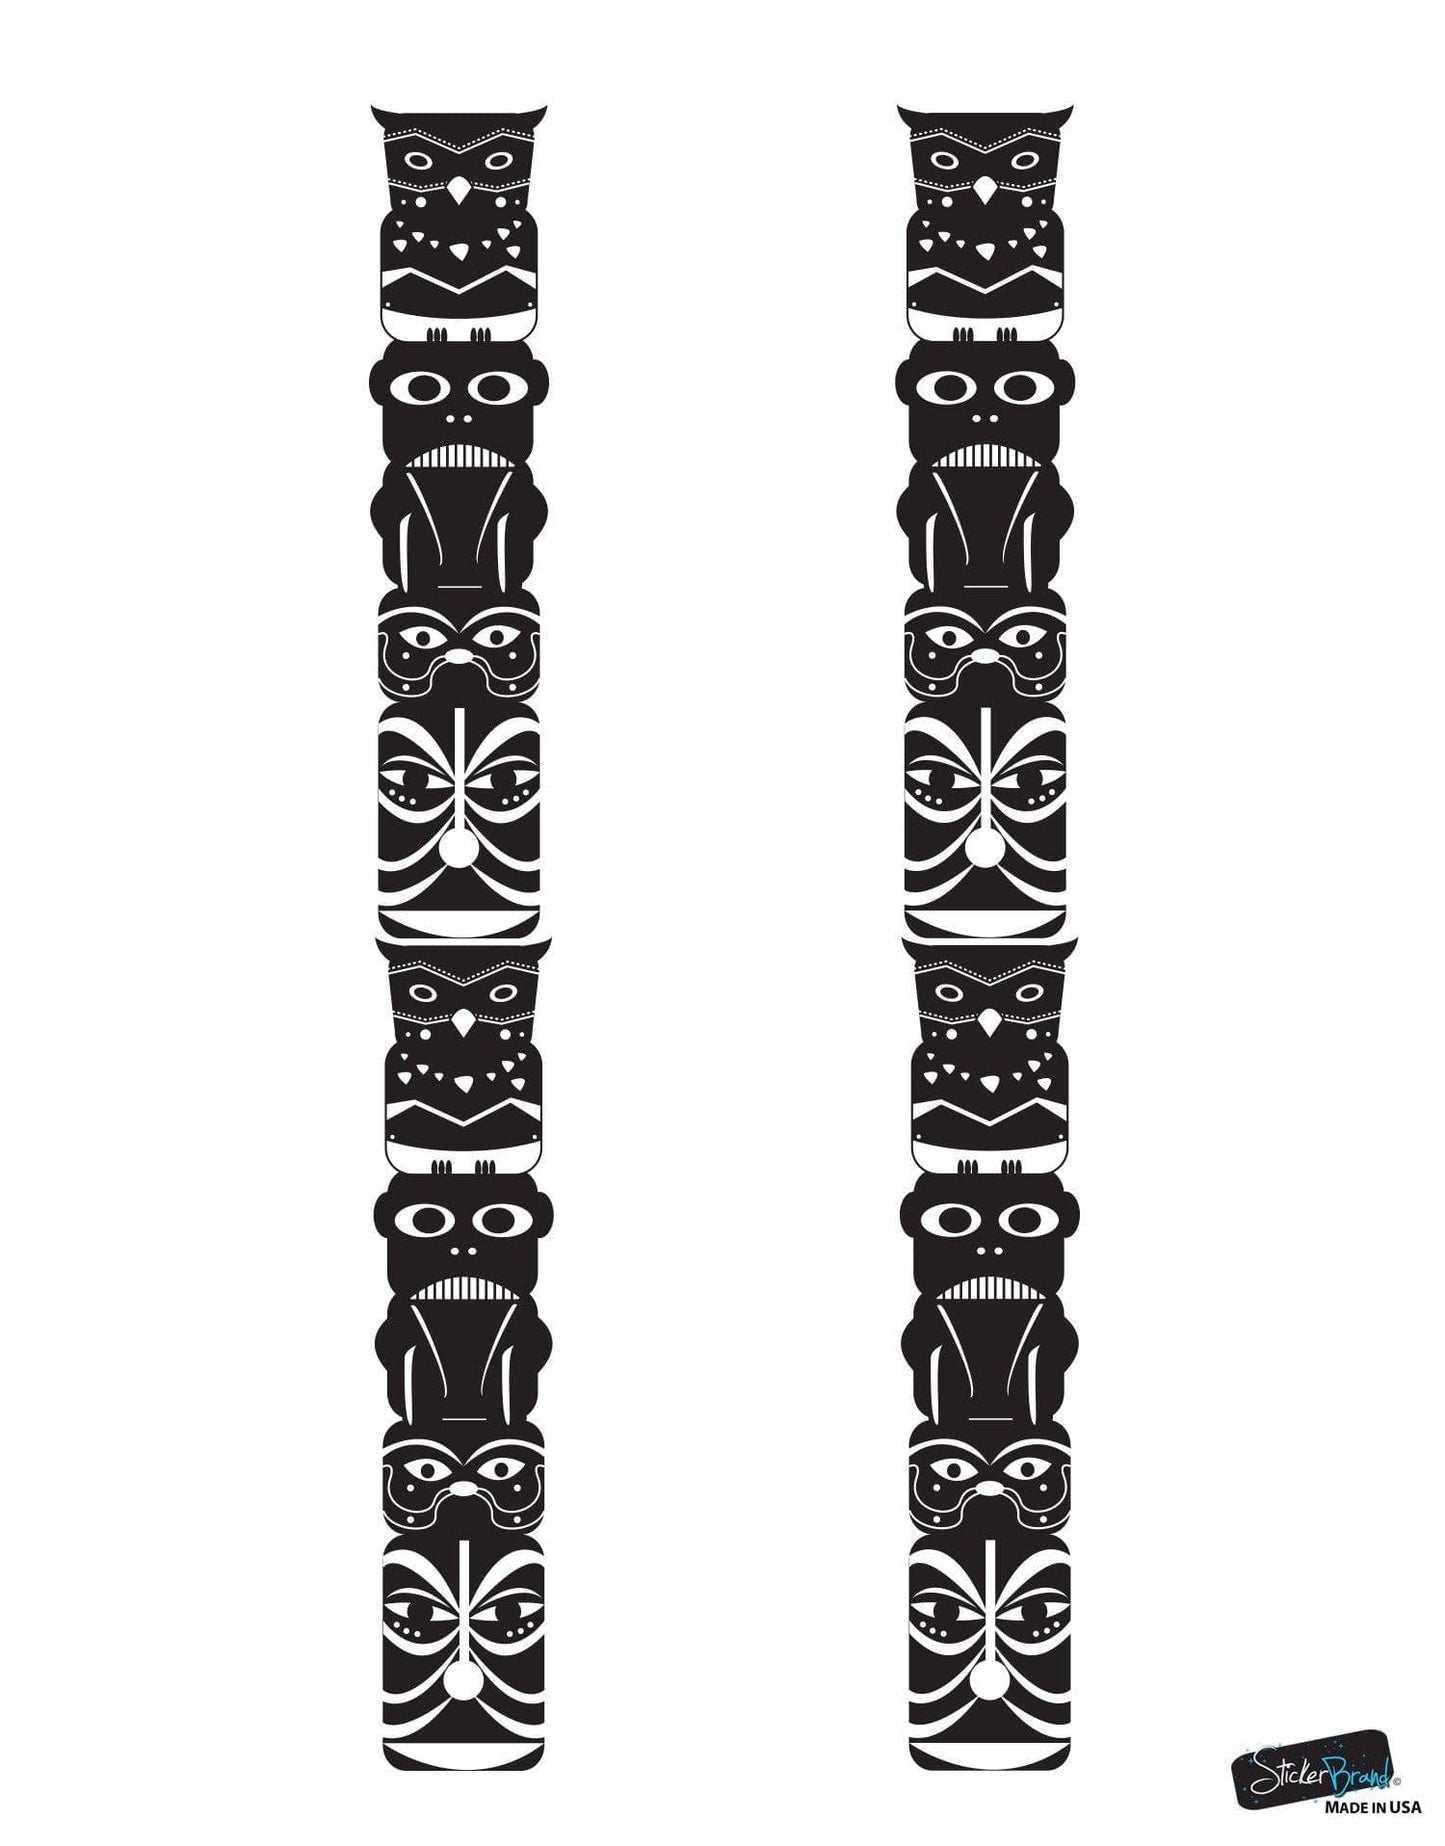 Totem Pole Vinyl Wall Decal Sticker (Set of 2) #OS_DC175